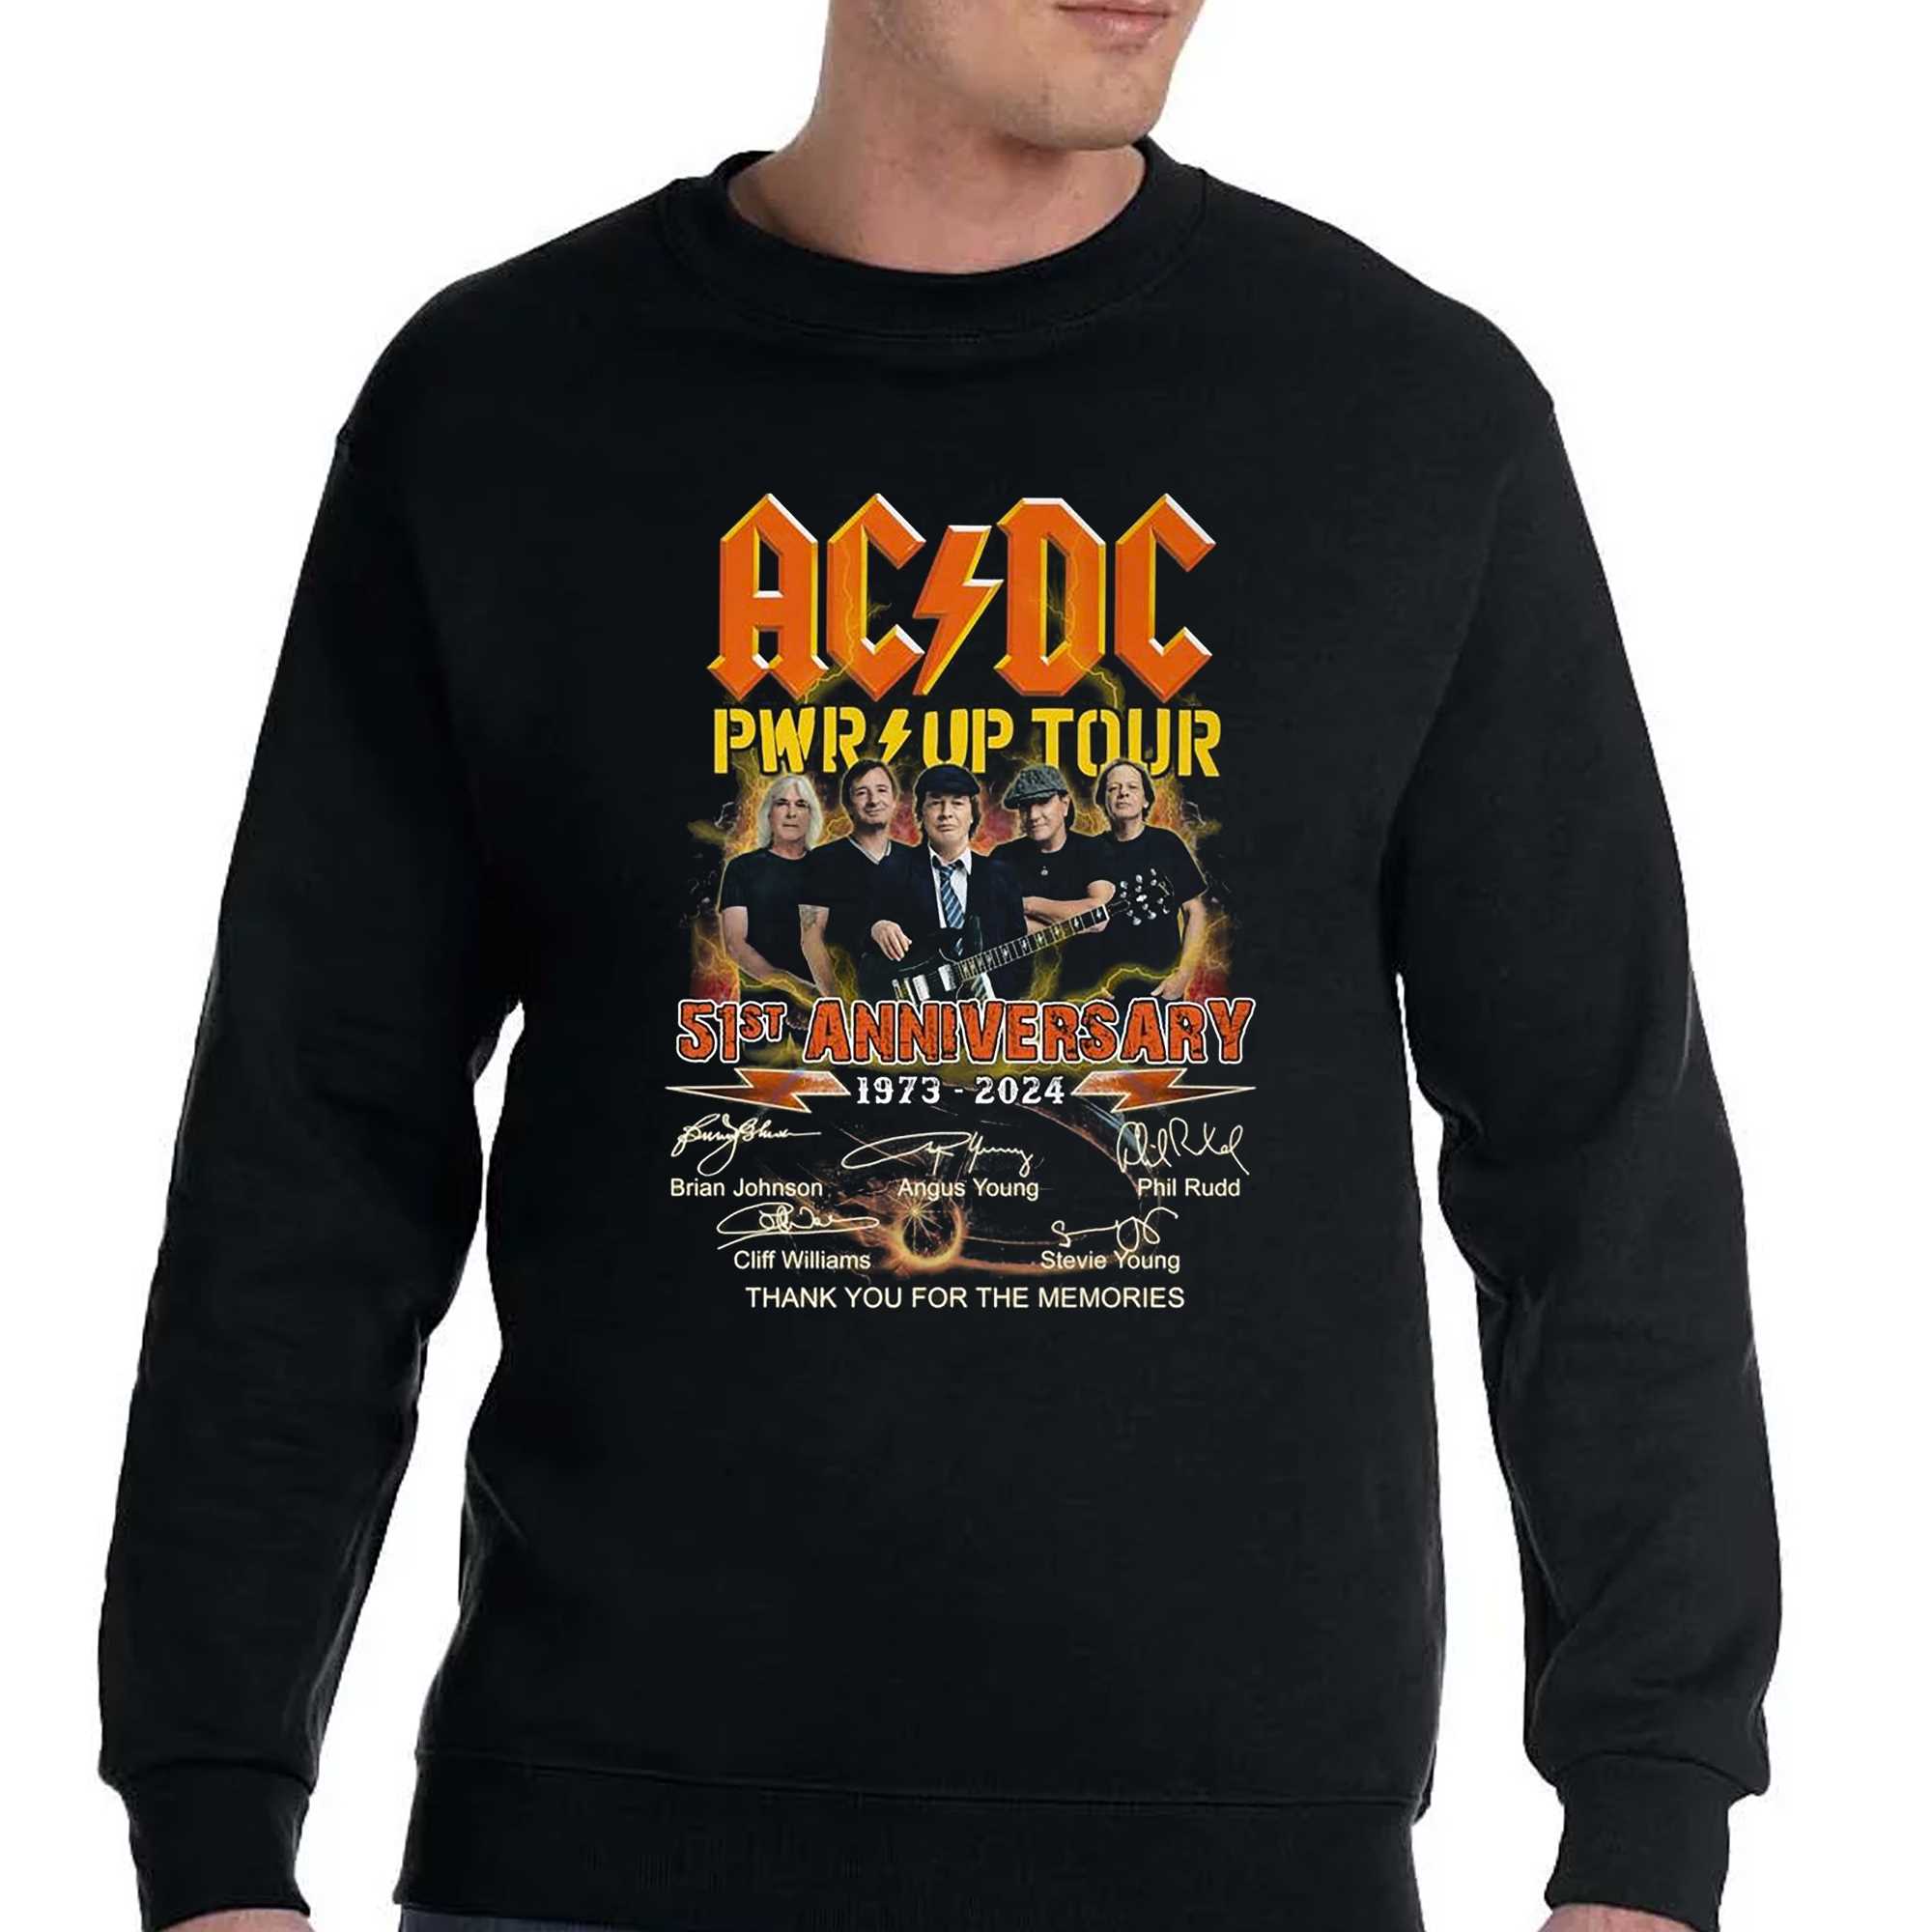 Acdc Pwr Up Tour 51st Anniversary 1973 � 2024 Thank You For The Memories T-shirt 